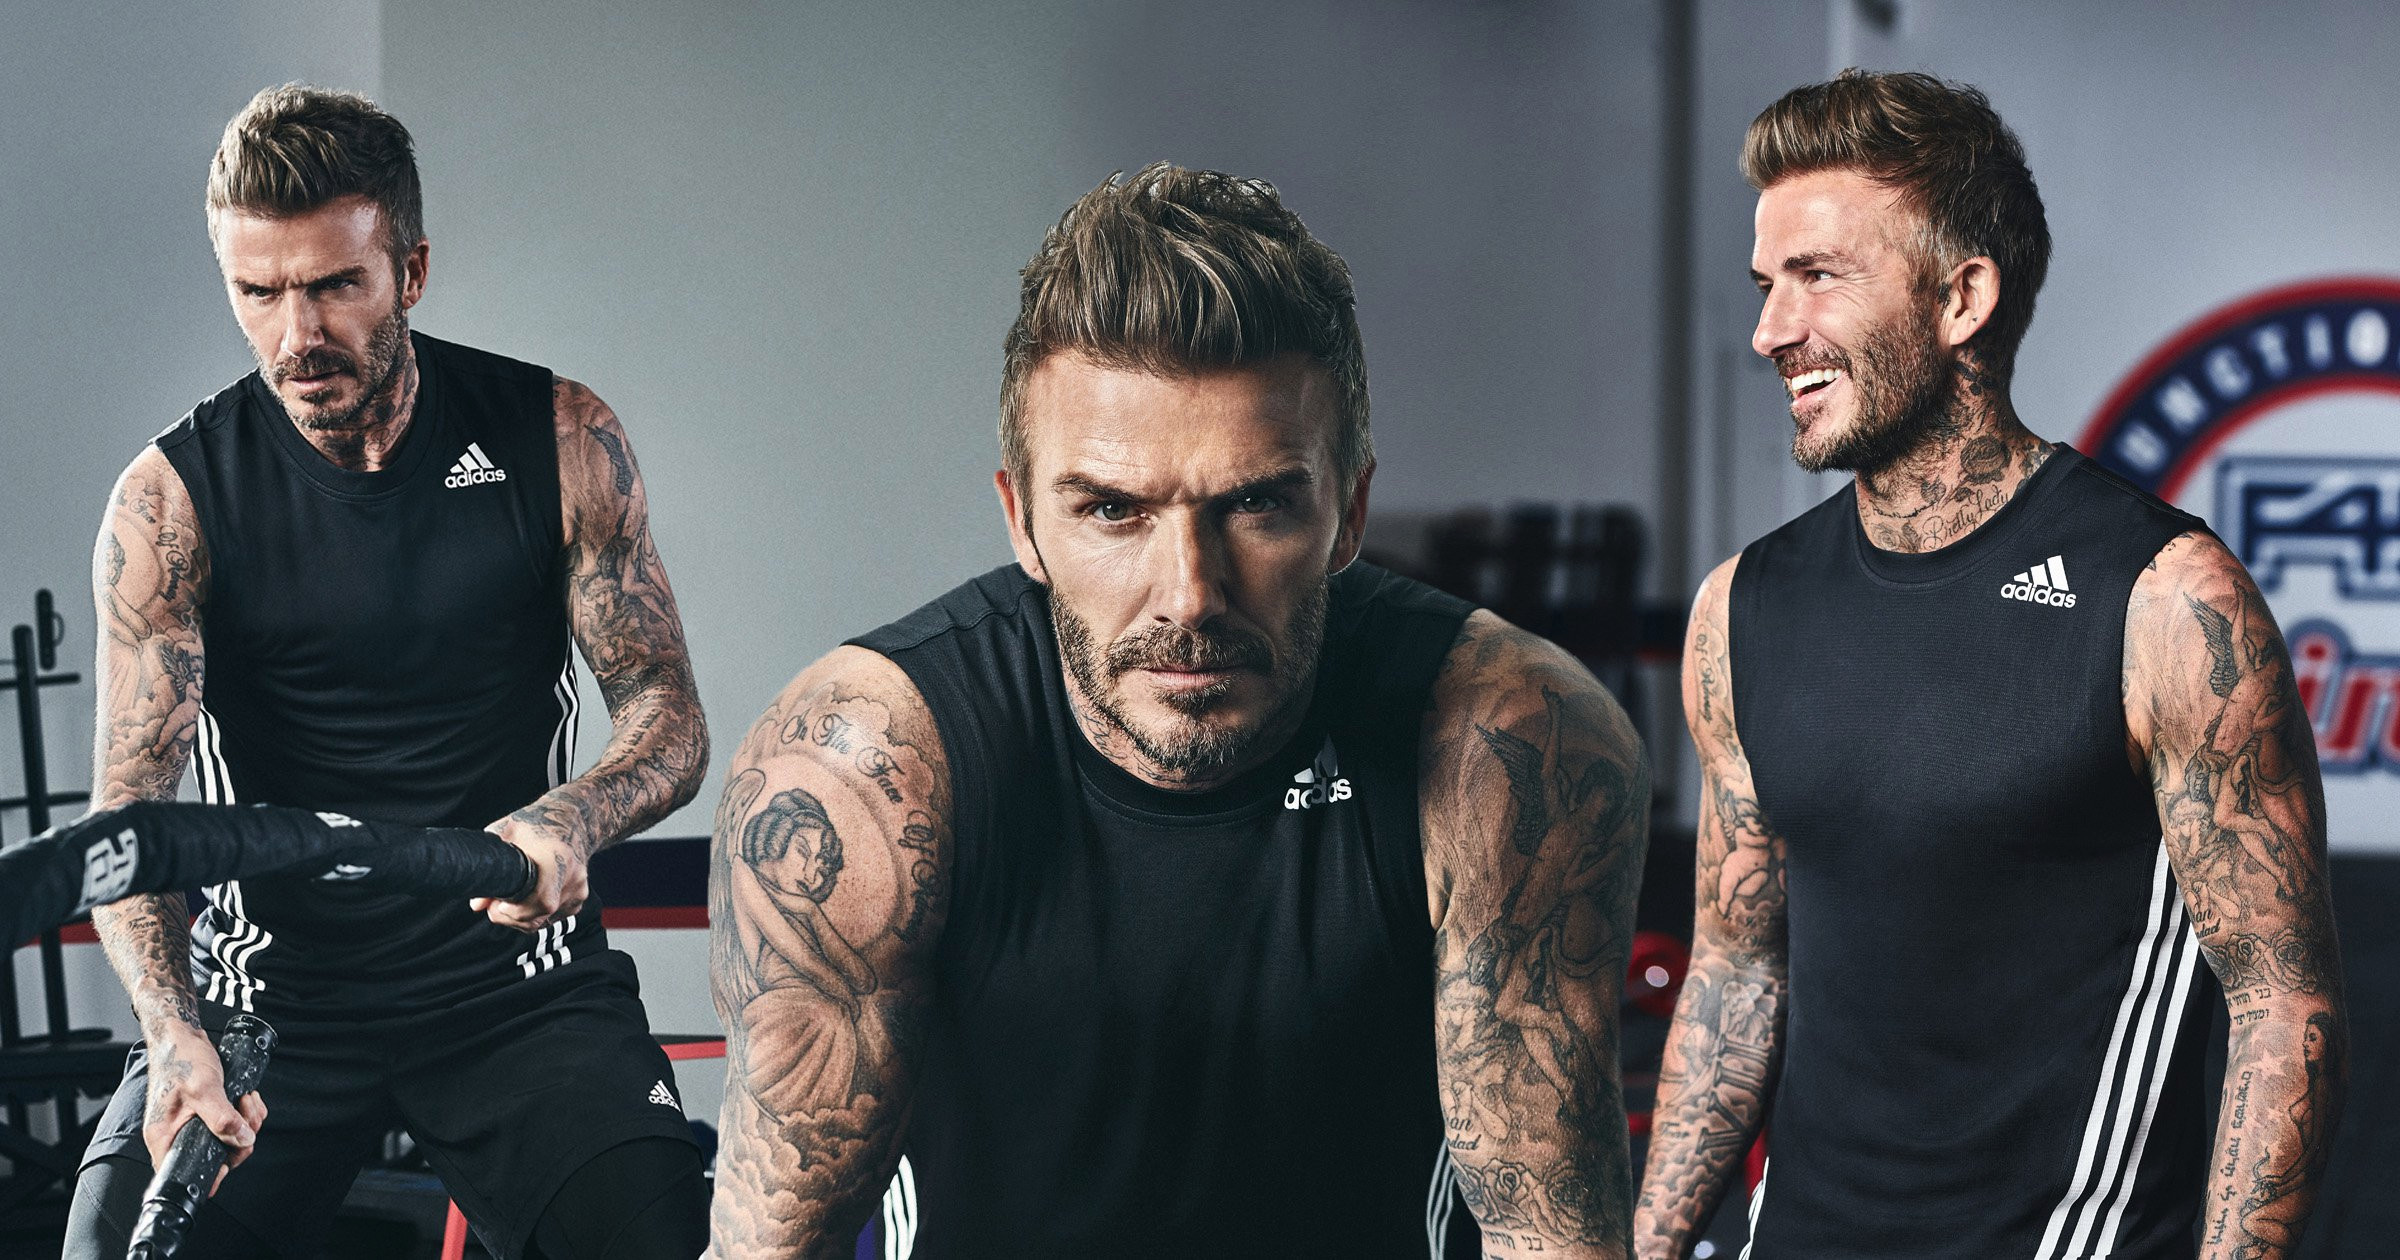 David Beckham looks buff as he’s unveiled as the face of fitness brand F45